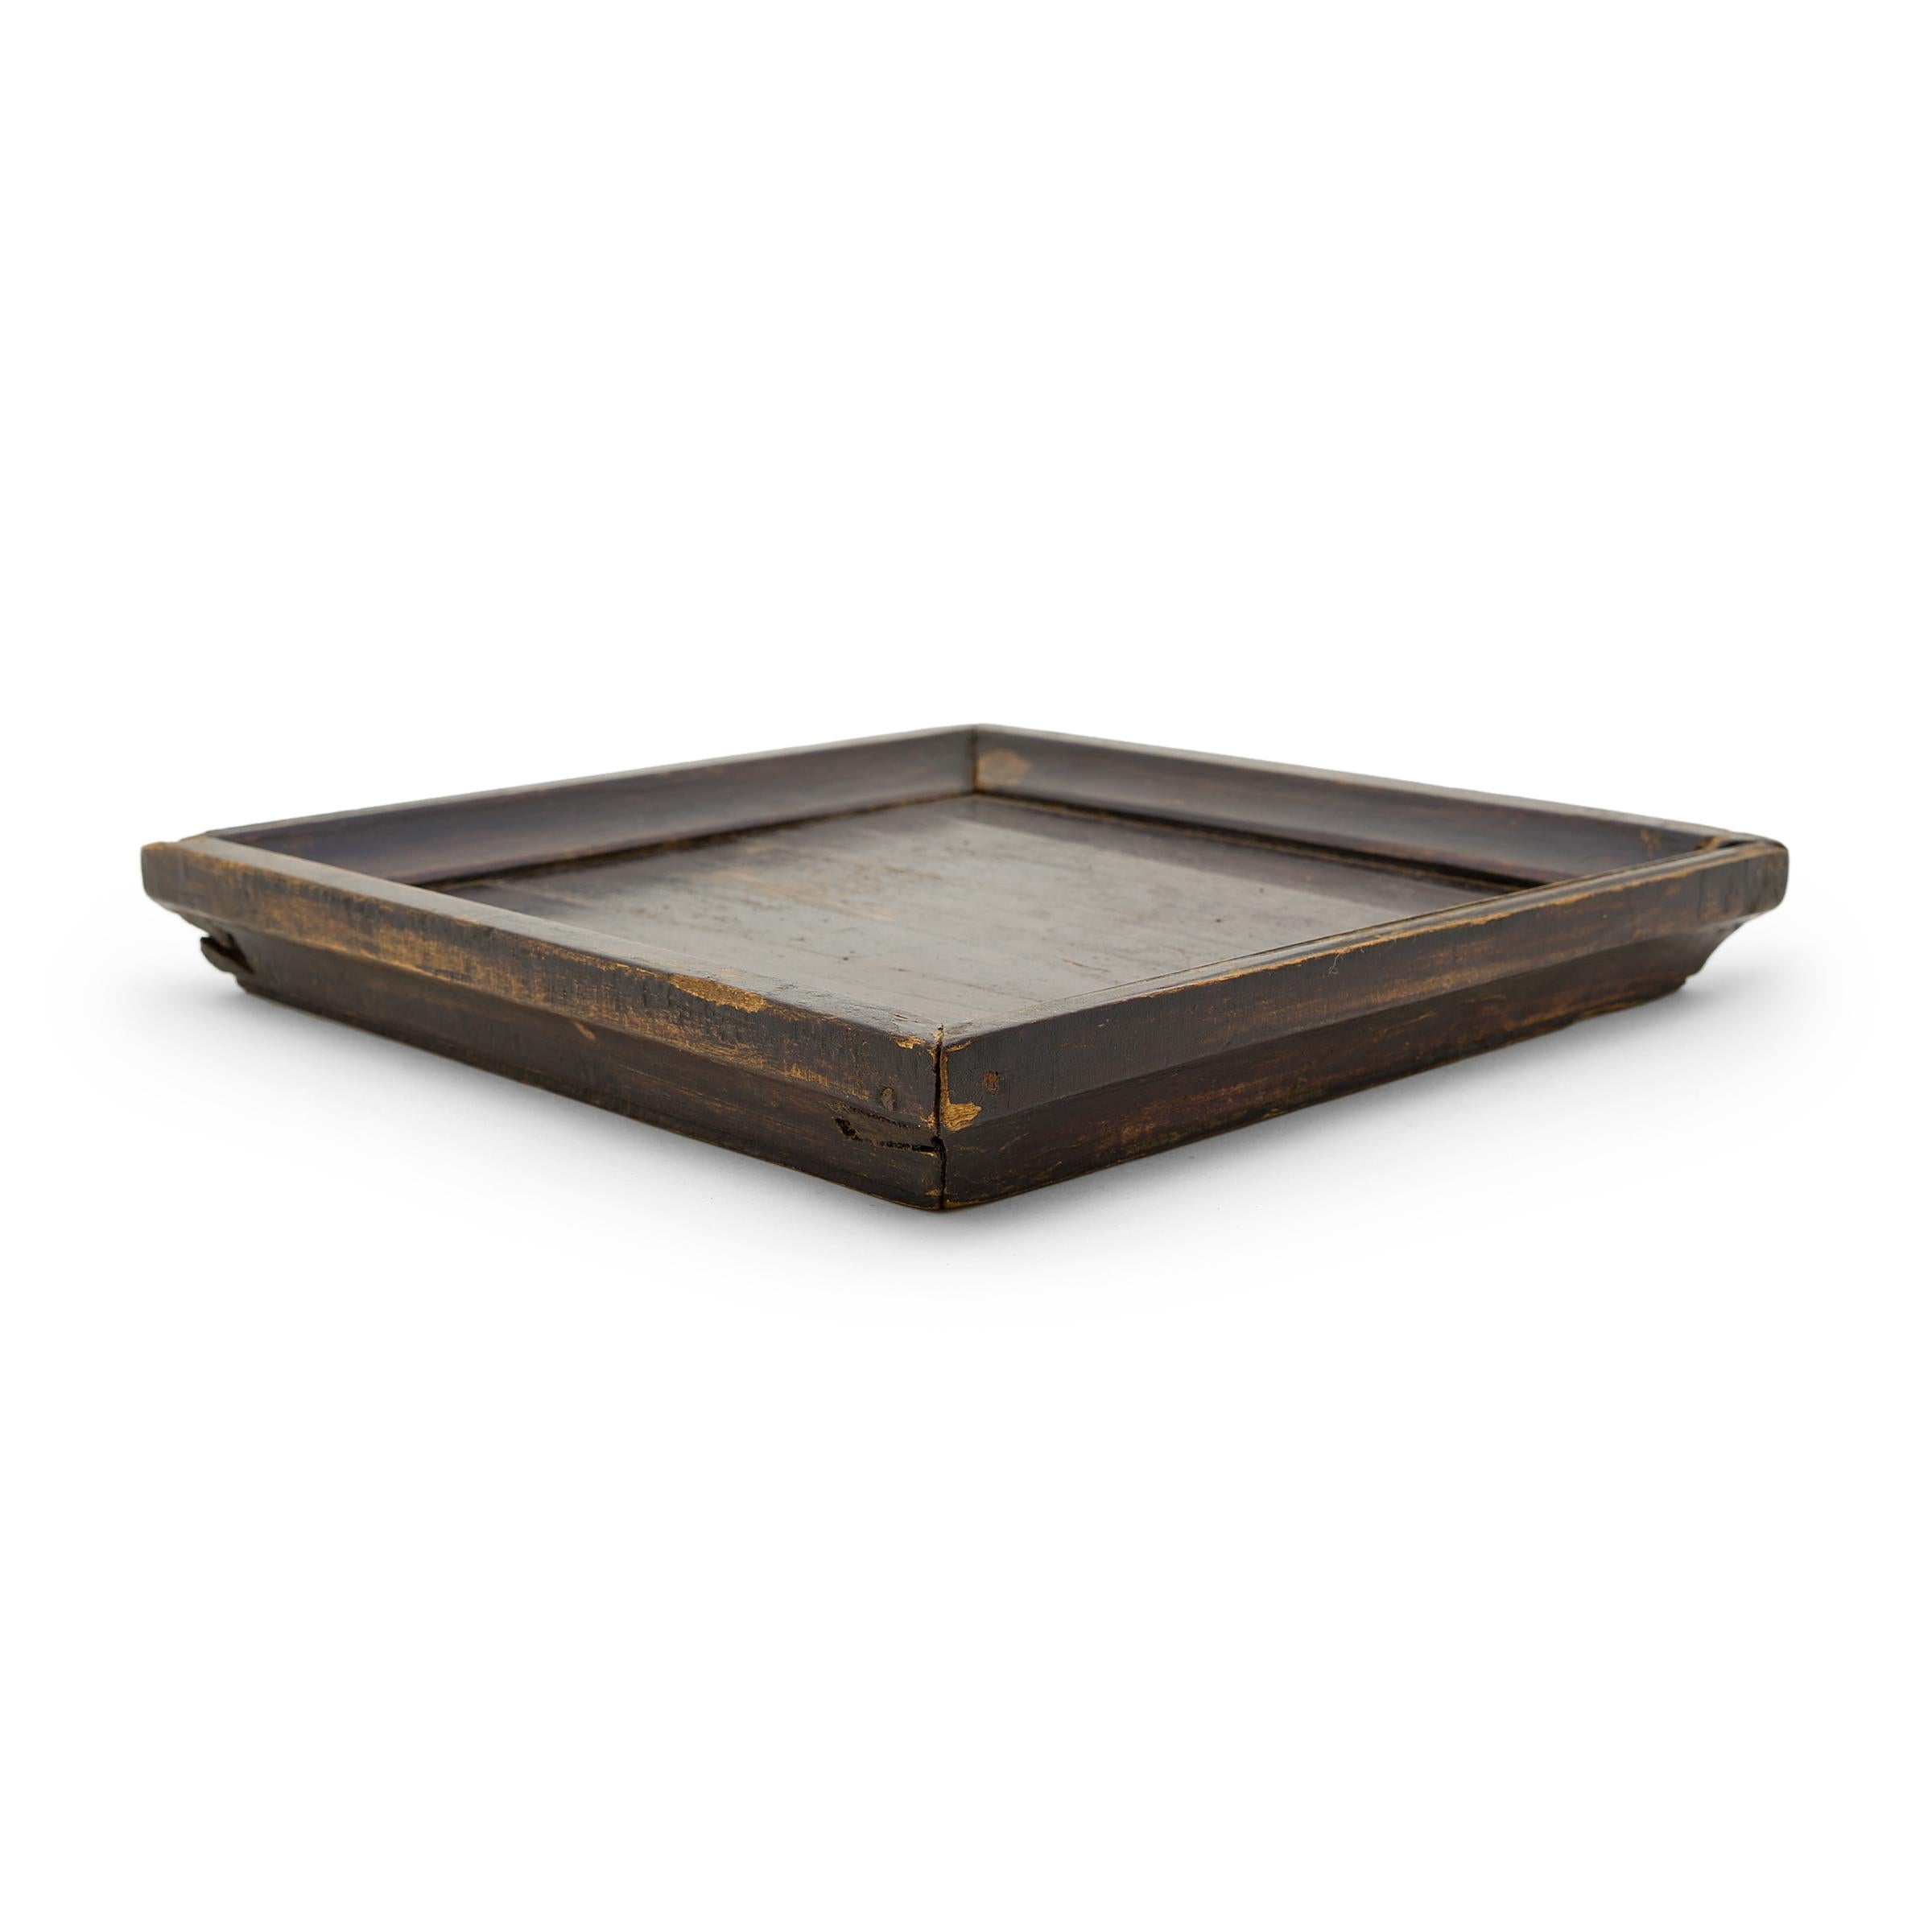 Simple lines, a modest form, and a layer of hand-brushed lacquer give this petite Qing-dynasty tray a provincial charm that recalls the warmth of home. The dark, red-brown lacquer finish has weathered with time to reveal the light brown coloring of